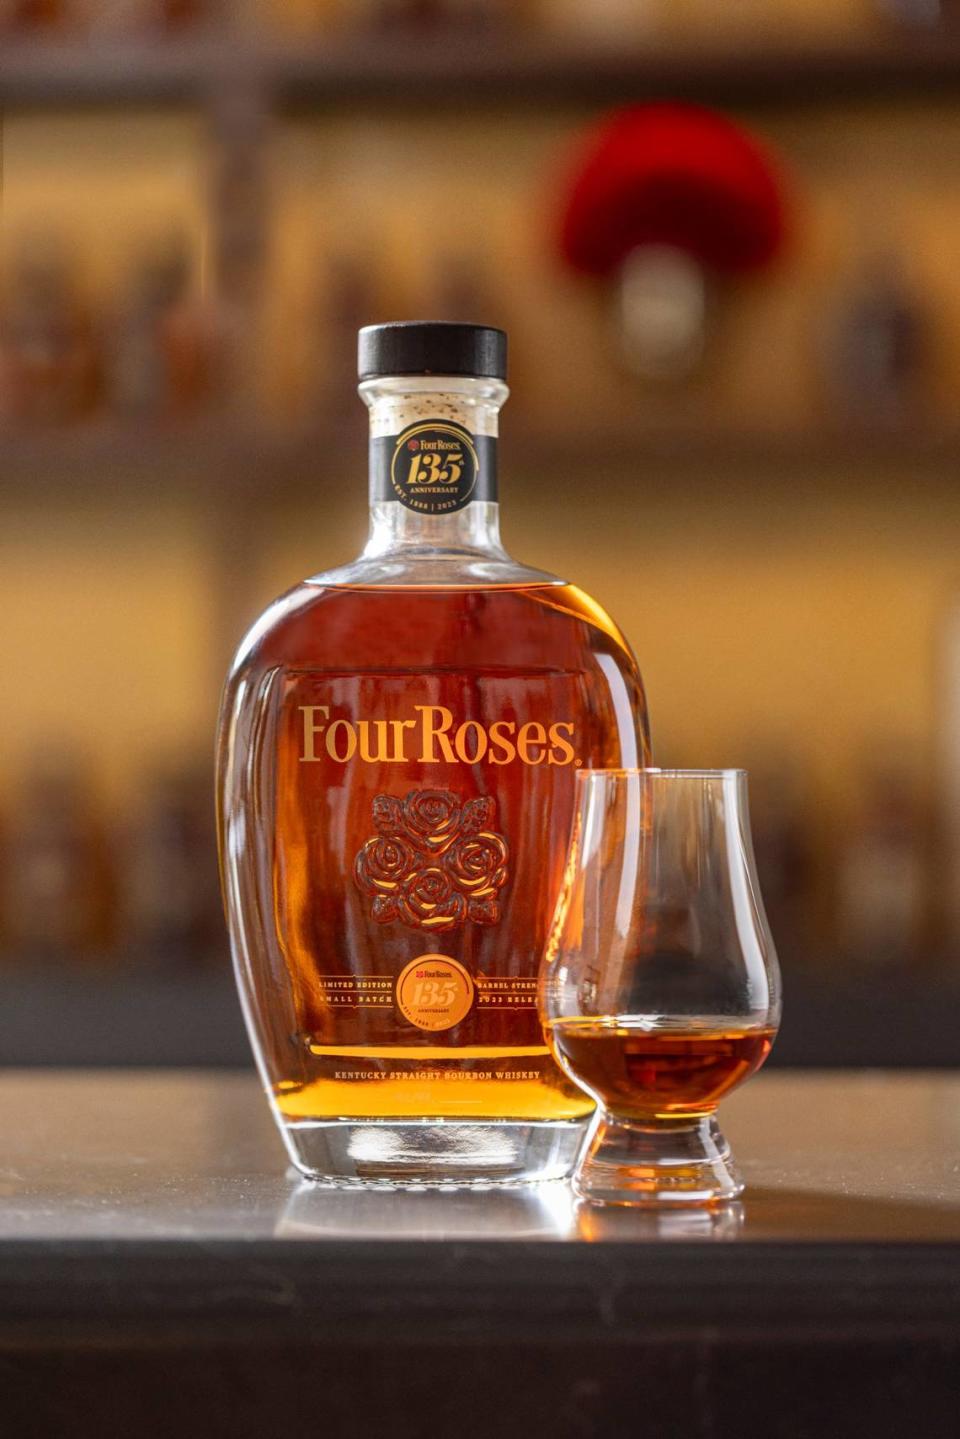 Four Roses is releasing its 135th Anniversary Limited Edition Small Batch on Sept. 15. You can apply online for a lottery to purchase at the Kentucky distillery’s gift shop in Lawrenceburg. It will be available to buy in other states later.